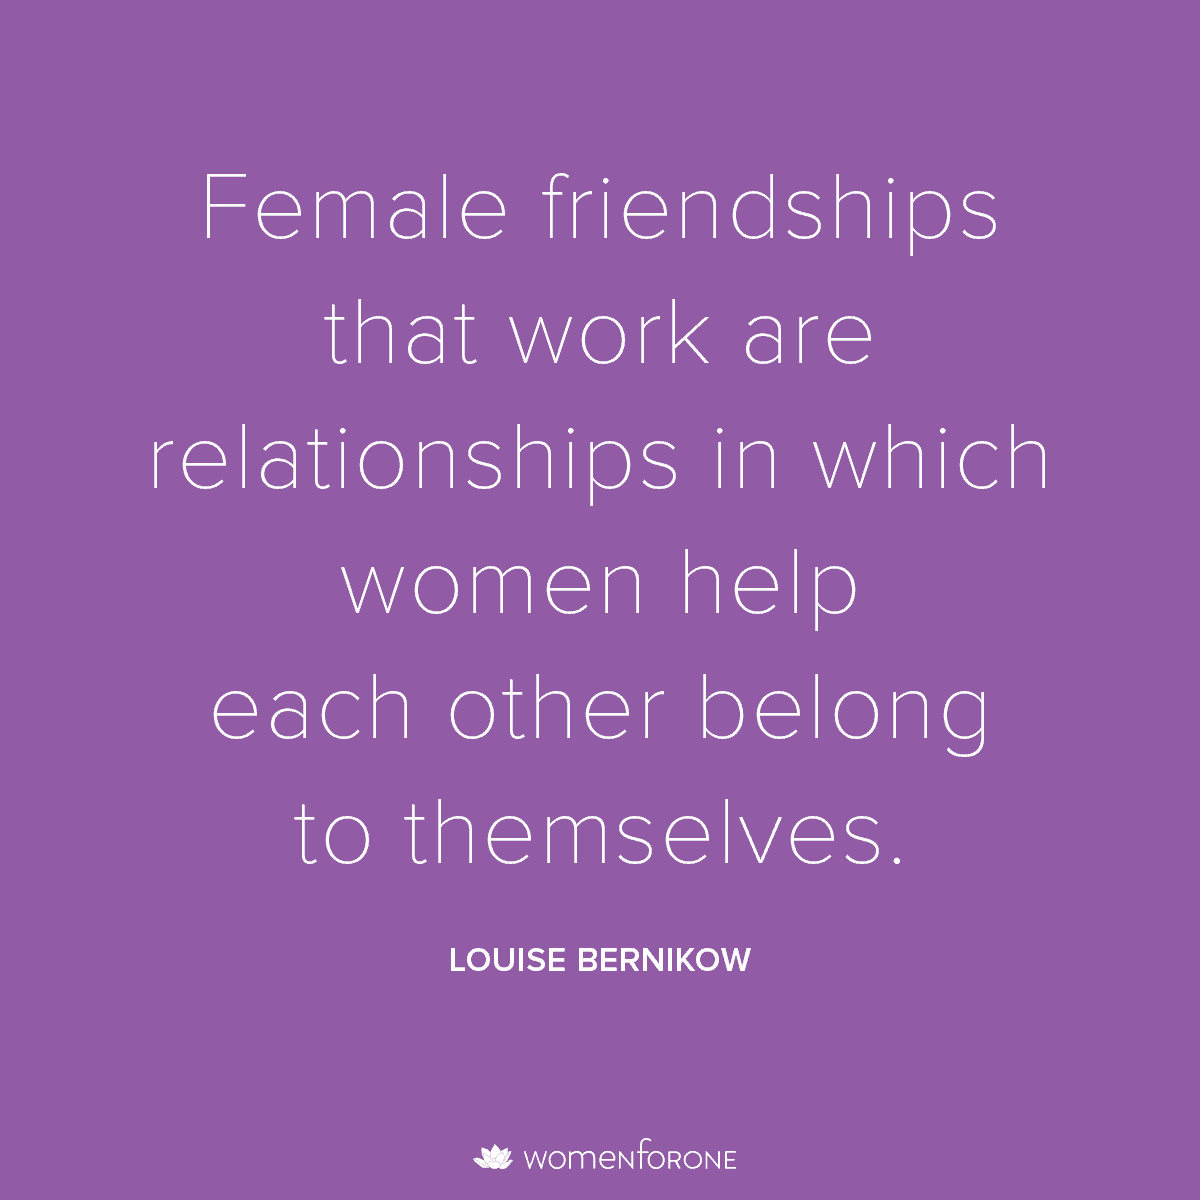 Female friendships that work are relationships in which women help each other belong to themselves. –Louise Bernikow